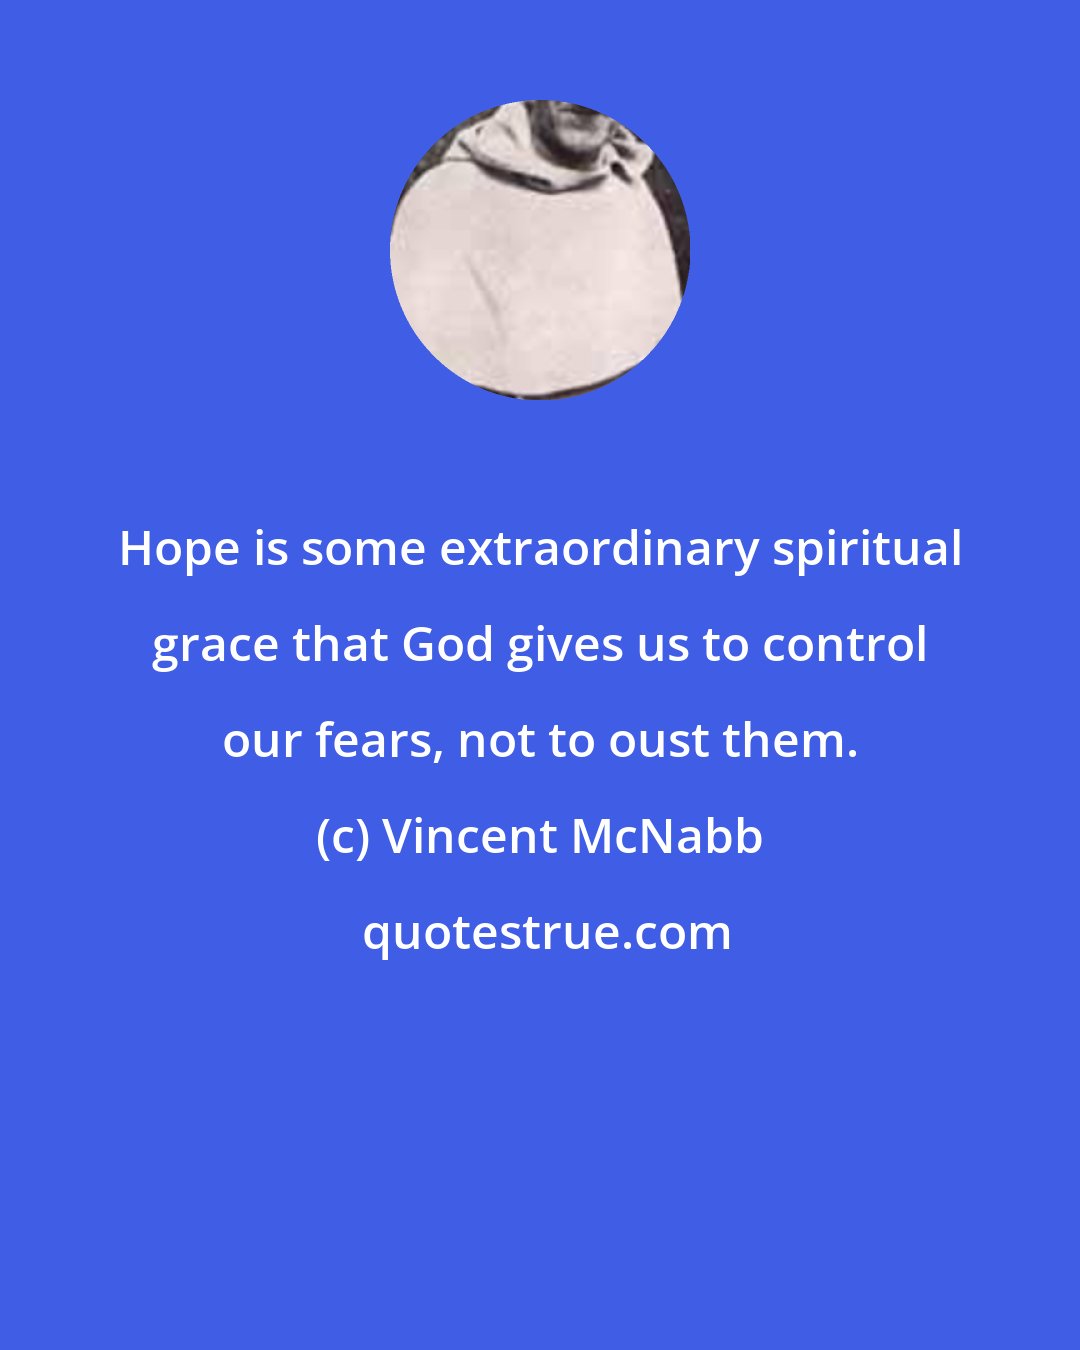 Vincent McNabb: Hope is some extraordinary spiritual grace that God gives us to control our fears, not to oust them.